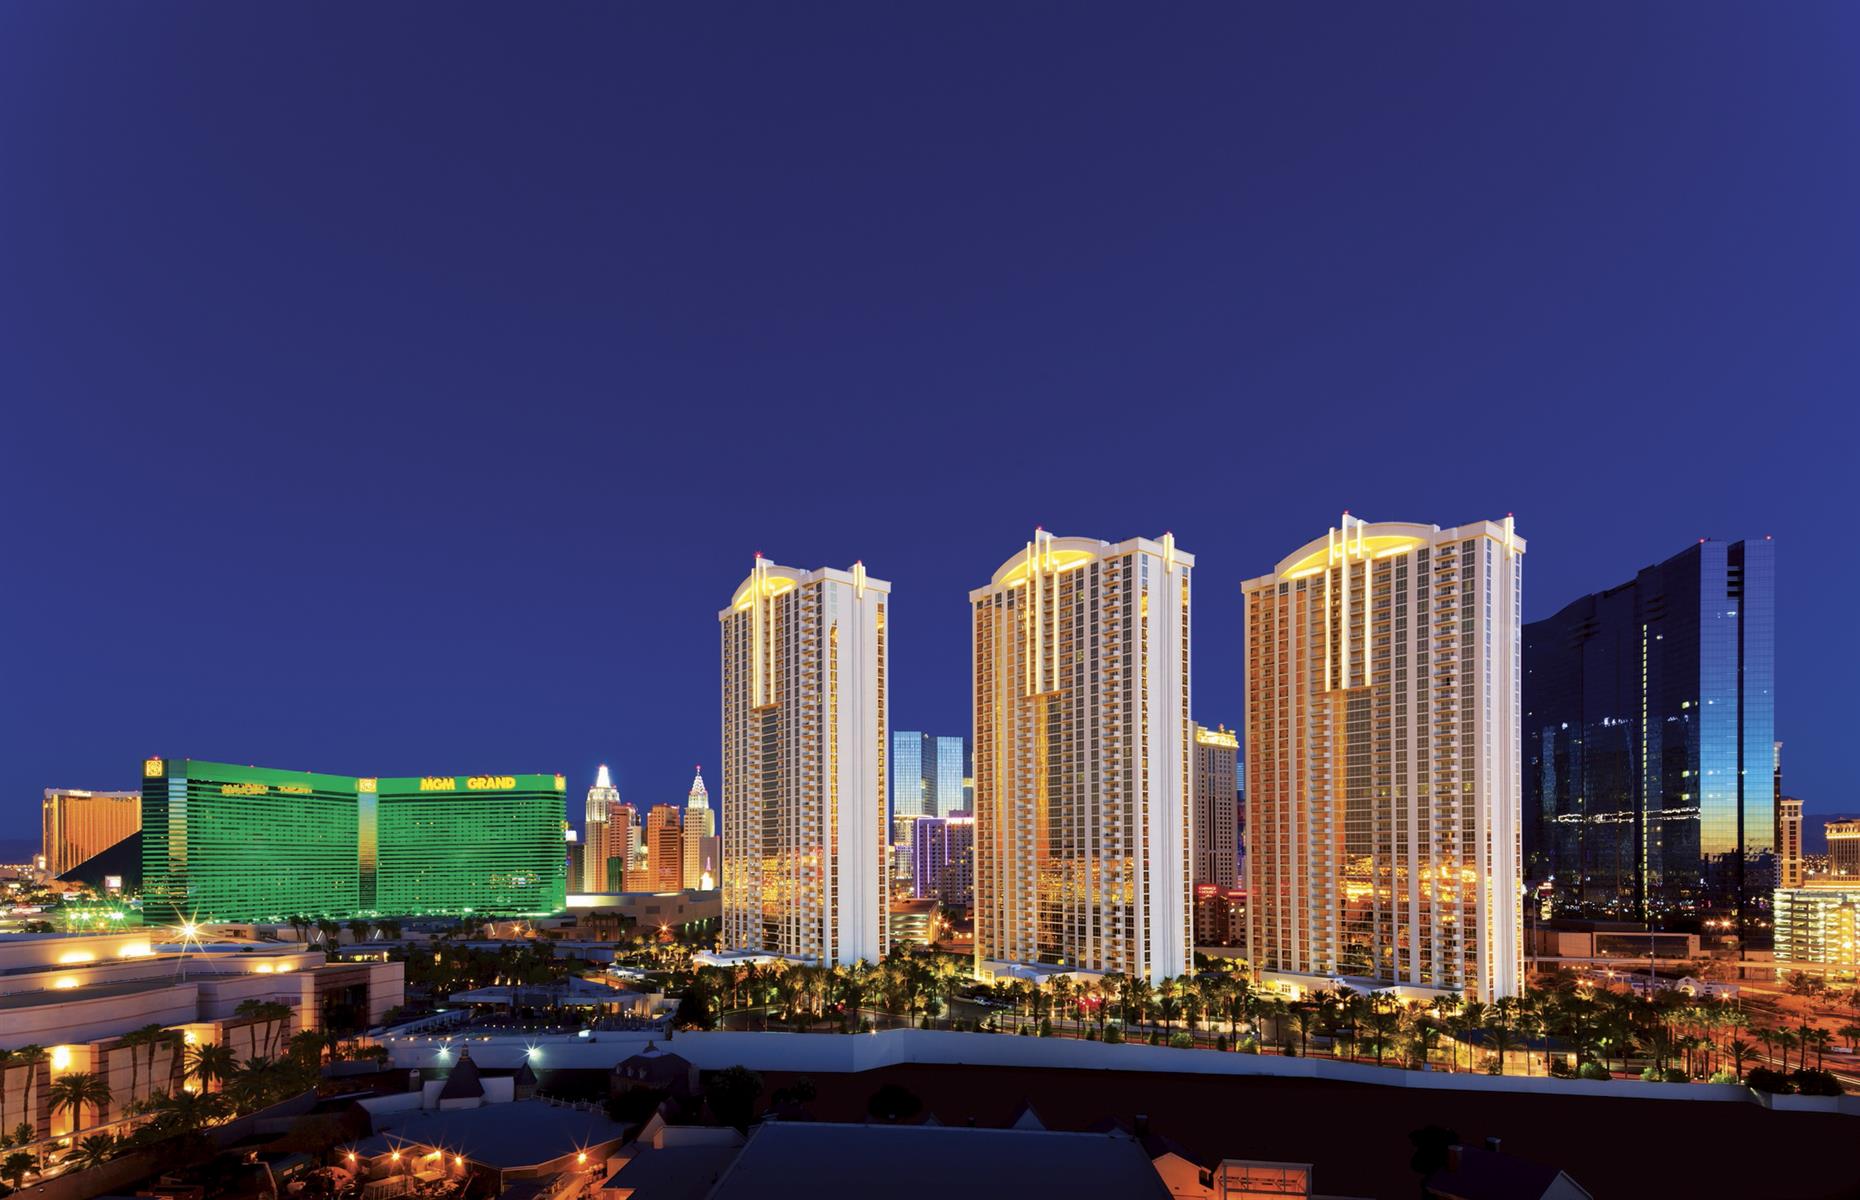 <p>The third largest hotel in the world and largest single hotel in the US, the dizzying MGM Grand lies at the southern end of super-hotel lined Strip with 6,071 rooms. It also has a 169,000 square-foot (51,511sqm) casino filled with 1,500 slot machines and 128 table games. You know you’re in for a grand old time, as soon as you walk through its front entrance, guarded by a 45-foot (14m) lion: it’s the largest bronze statue in the country.</p>